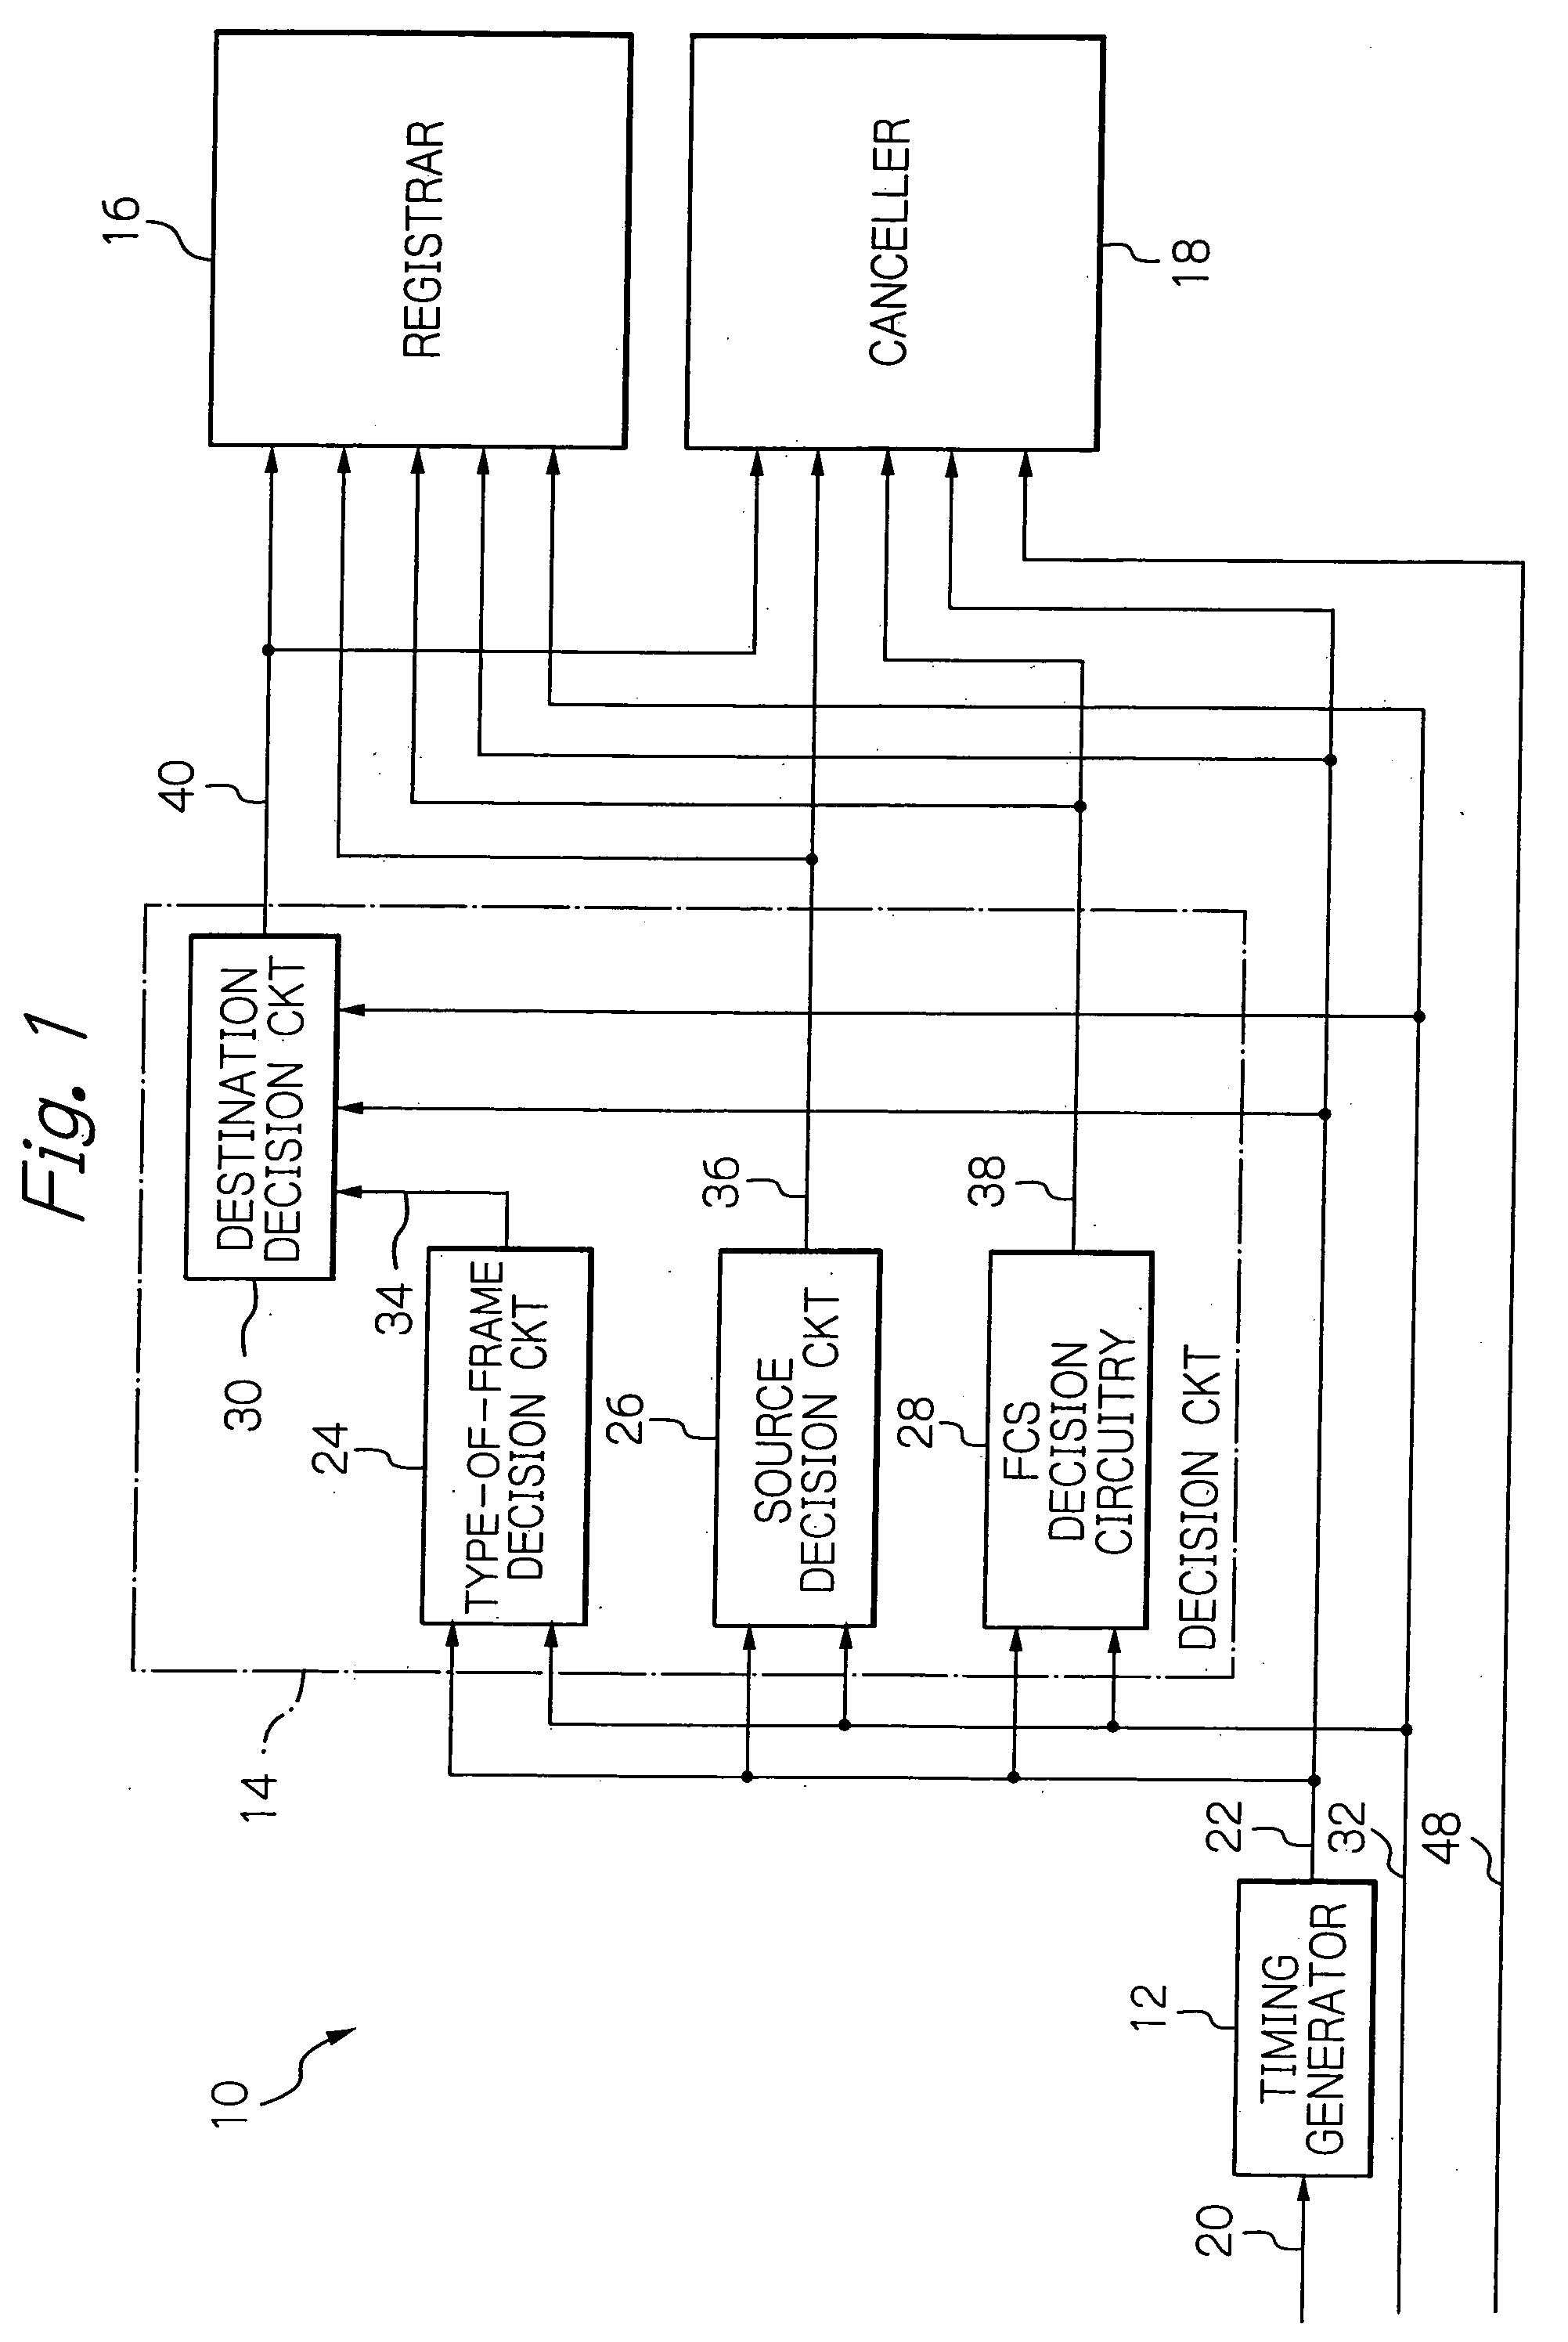 Radio apparatus joining an IBSS or ad hoc network